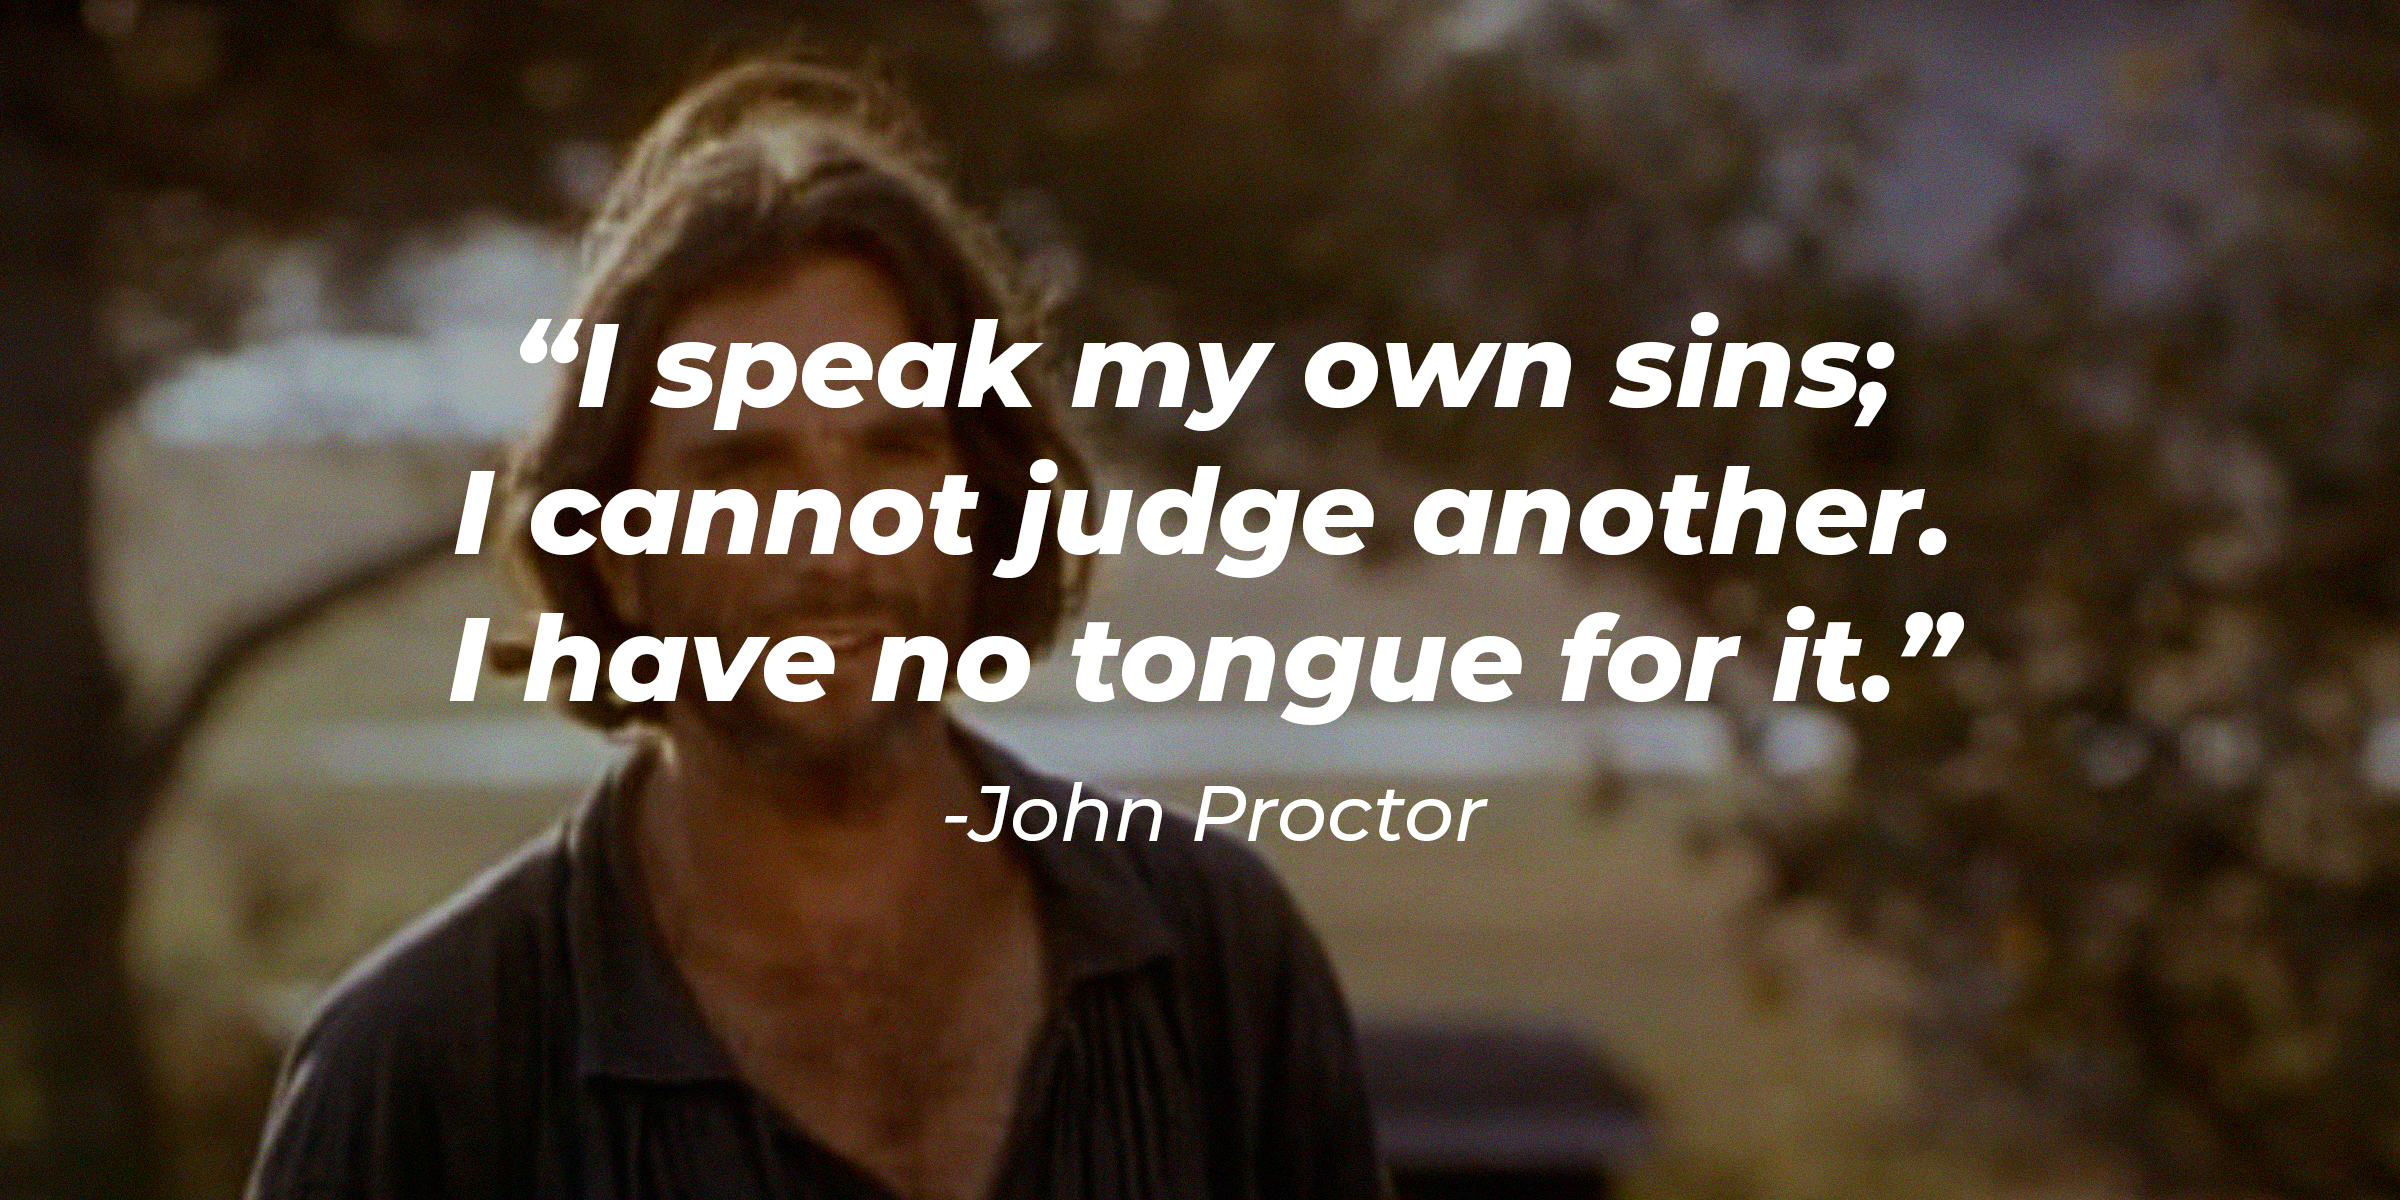 Source: Youtube.com/FoxConnect | Photo of John Proctor with the quote: "I speak my own sins; I cannot judge another. I have no tongue for it."